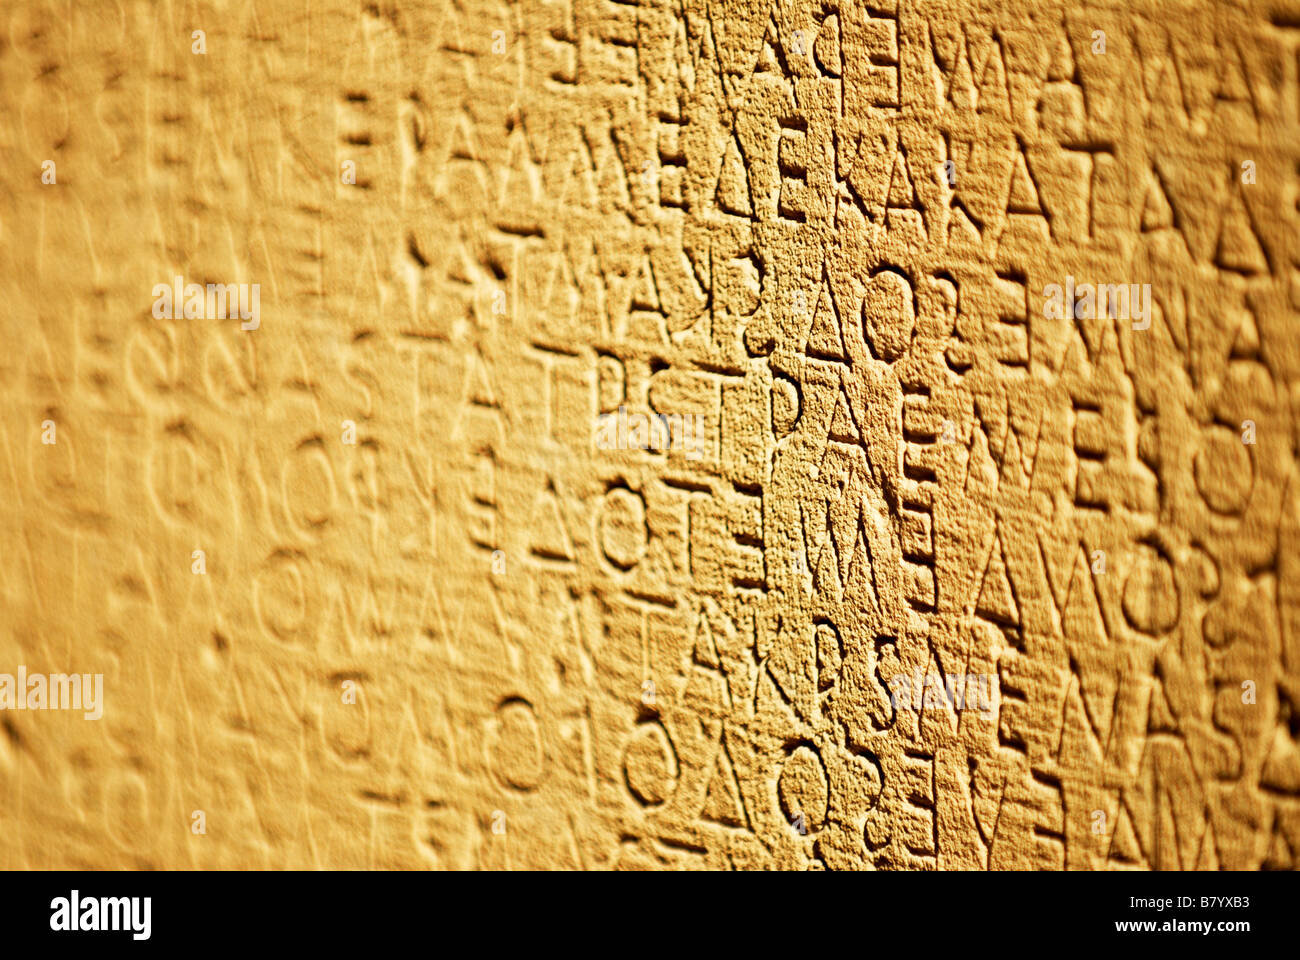 Stone tablets engraved with Laws of Gortyna, Crete, Greece Stock Photo